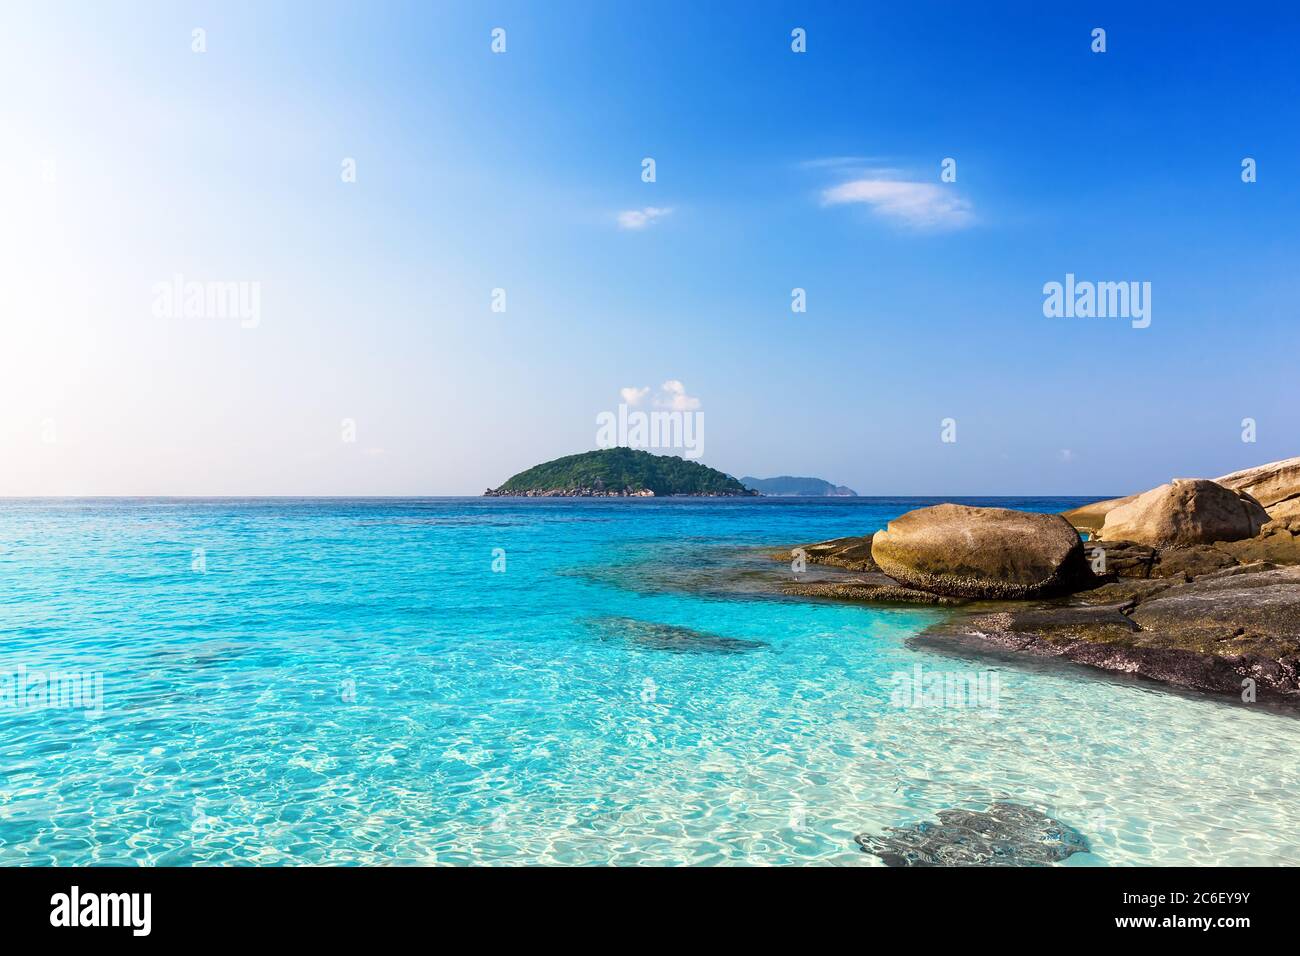 Wave of sea on sand beach in Similan island, Thailand. Holiday summer background. Amazing beach of Similan island with turquoise water. Stock Photo